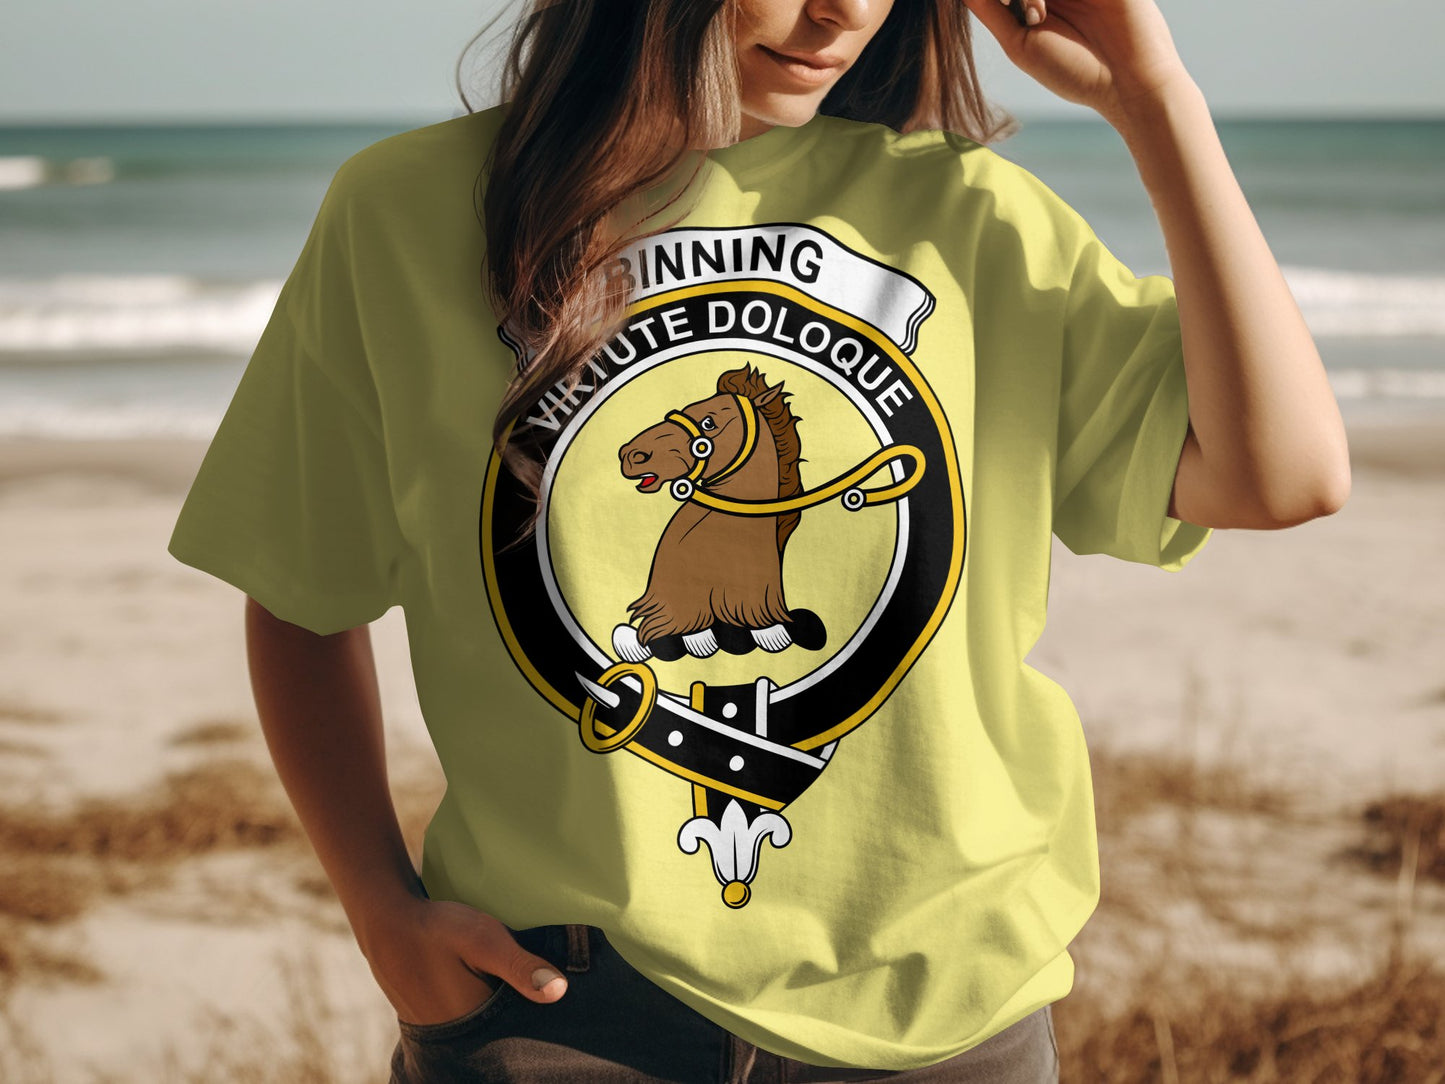 Binning Scottish Clan Crest T-Shirt Perfect for Highland Games - Living Stone Gifts